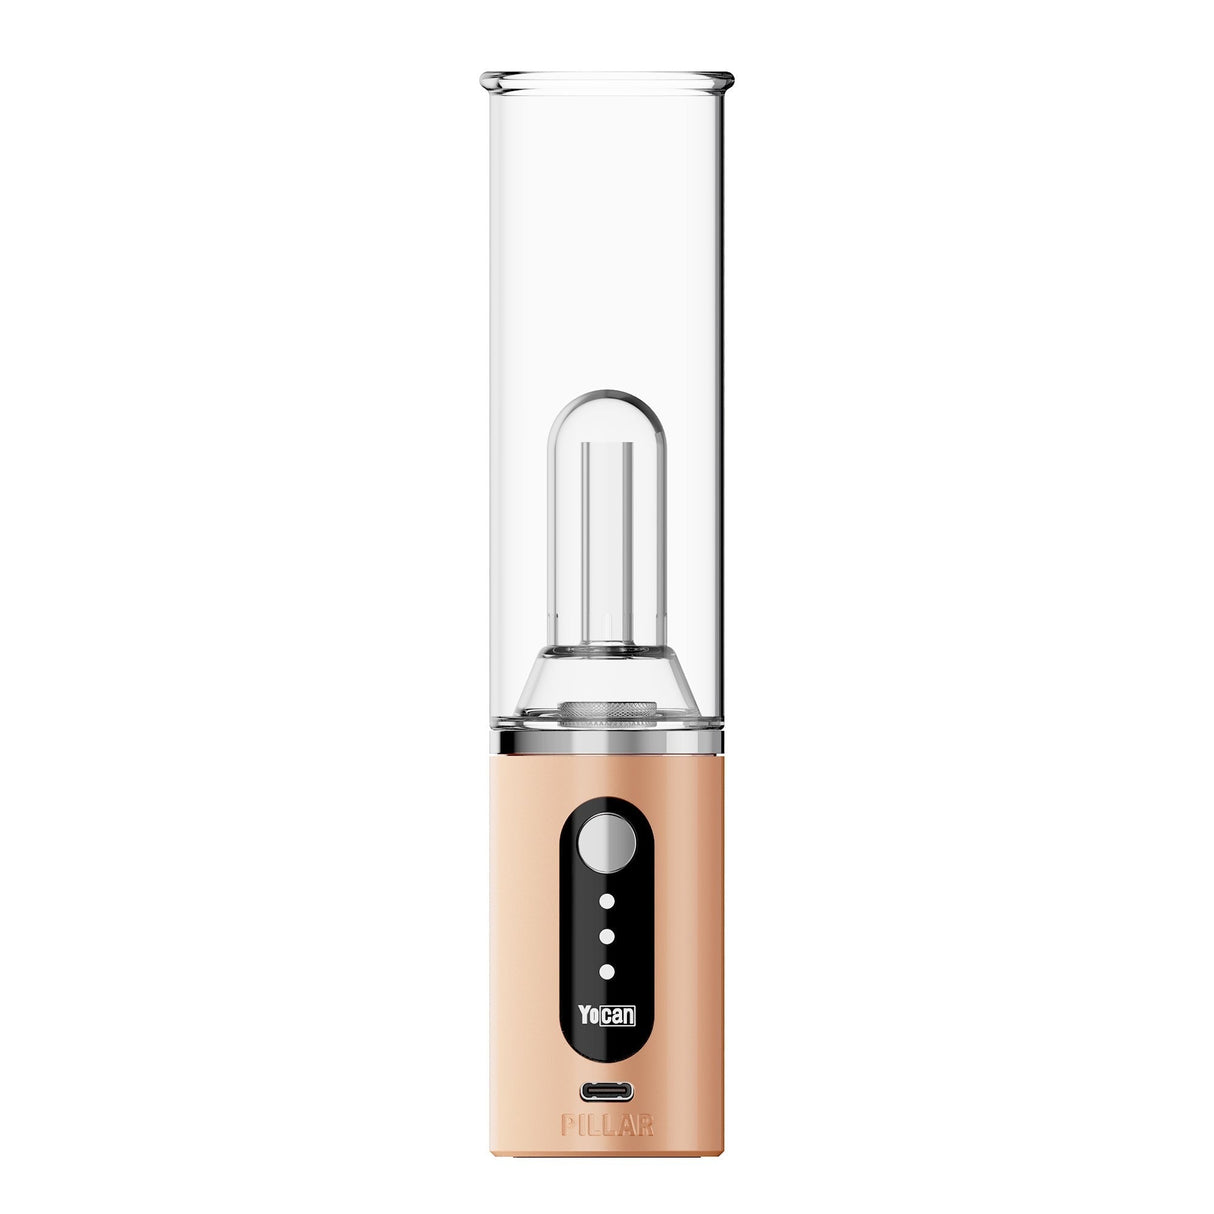 Yocan Pillar Electric Dab Rig in Orange - Front View with Clear Borosilicate Glass and 1400mAh Battery